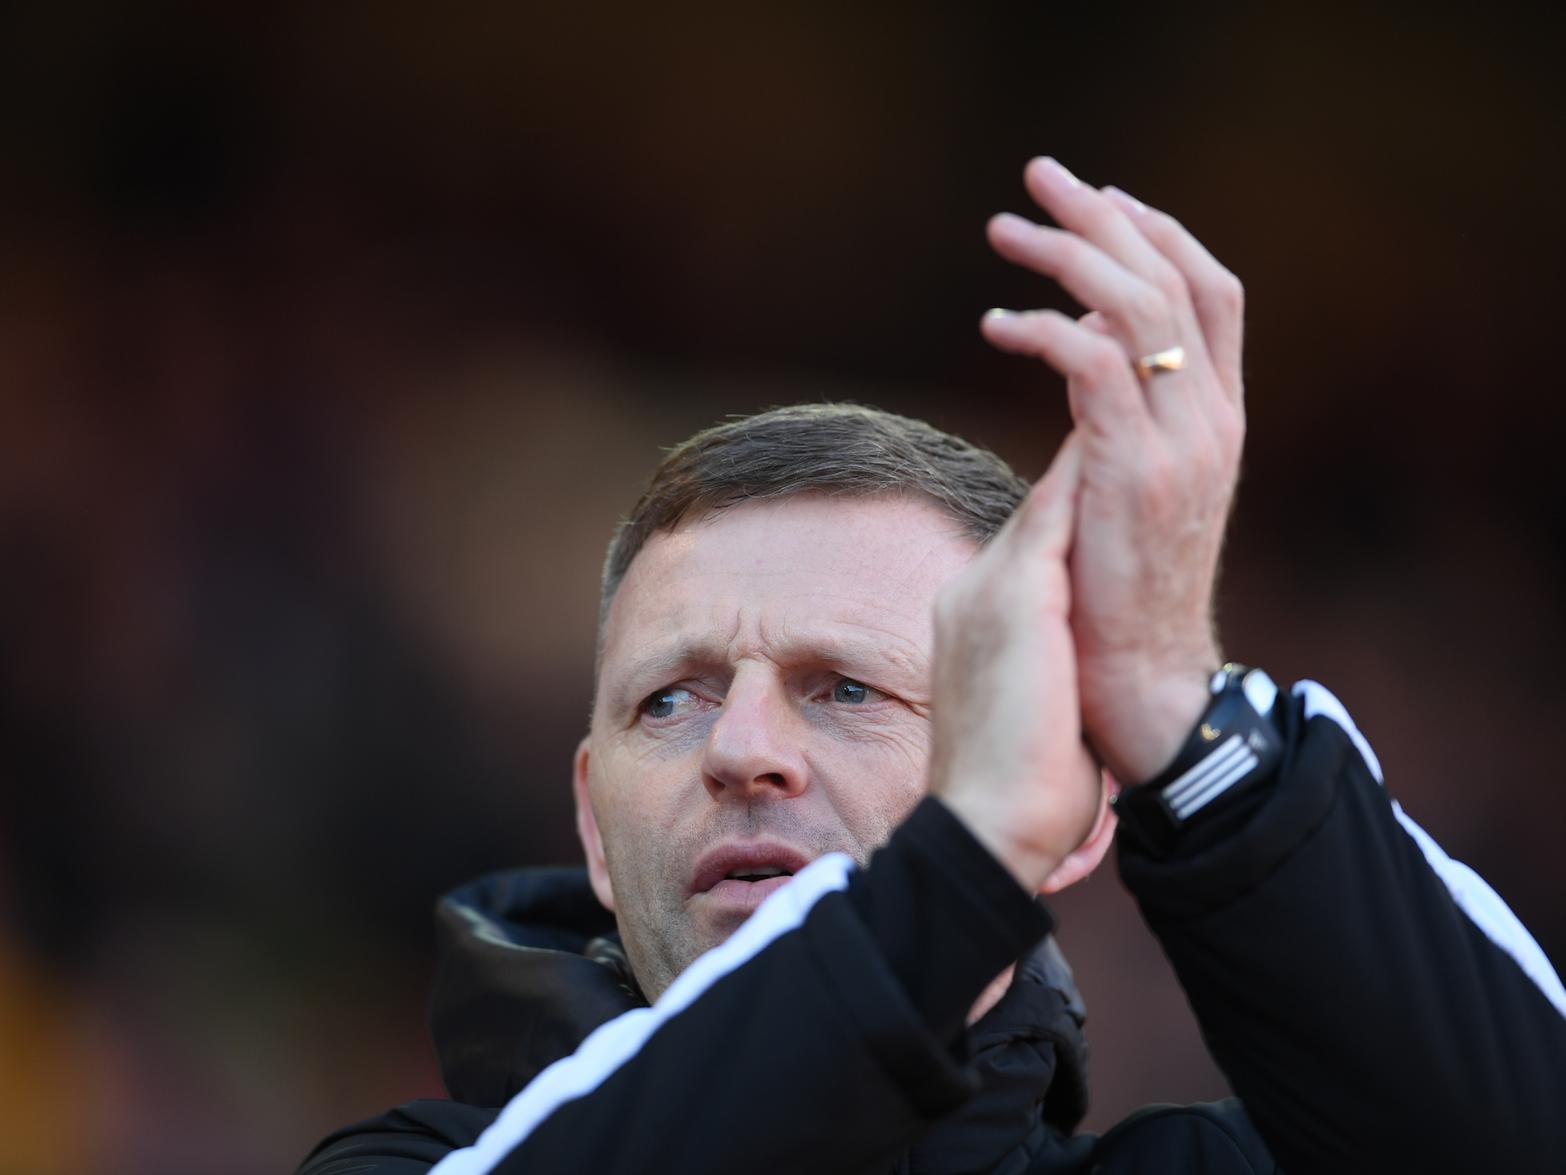 Luton Town manager Graeme Jones suggested his team were the better side after their narrow loss to Cardiff last Saturday, and stated that it was a lack of clinical finishing that let the Hatters down. (Luton Town official website)